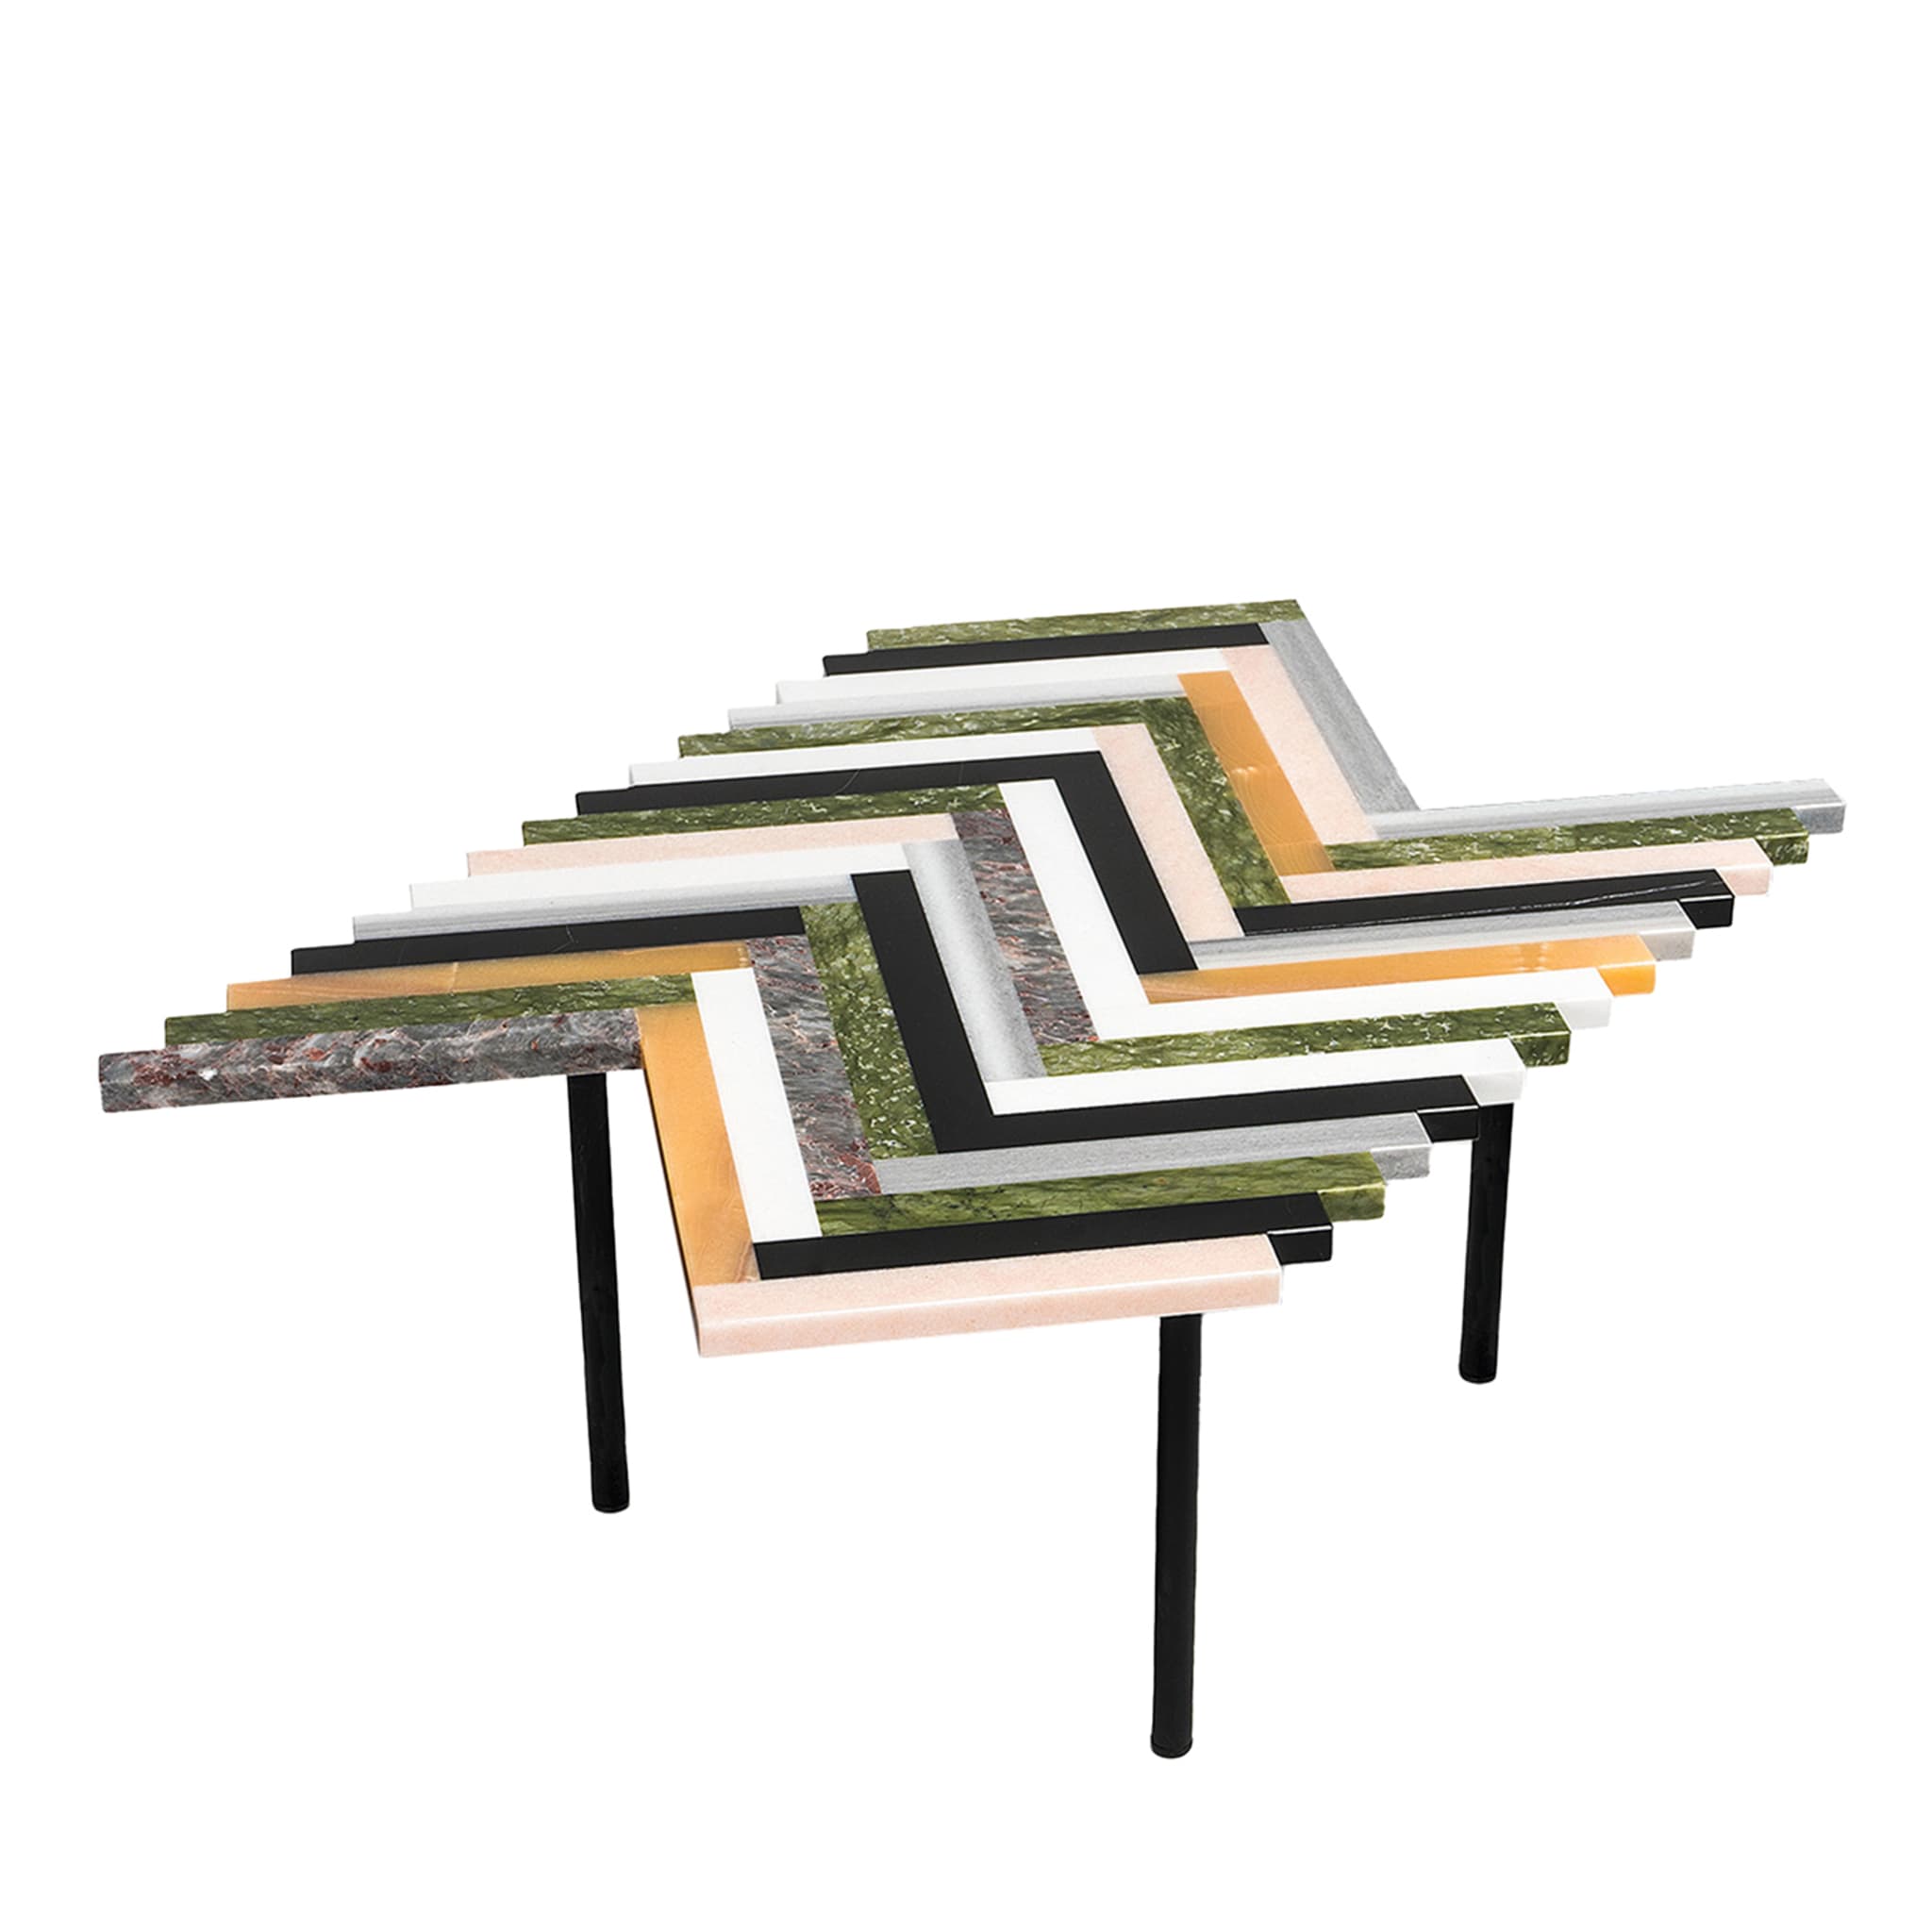 ZigZag Coffee Table S by Patricia Urquiola - Main view